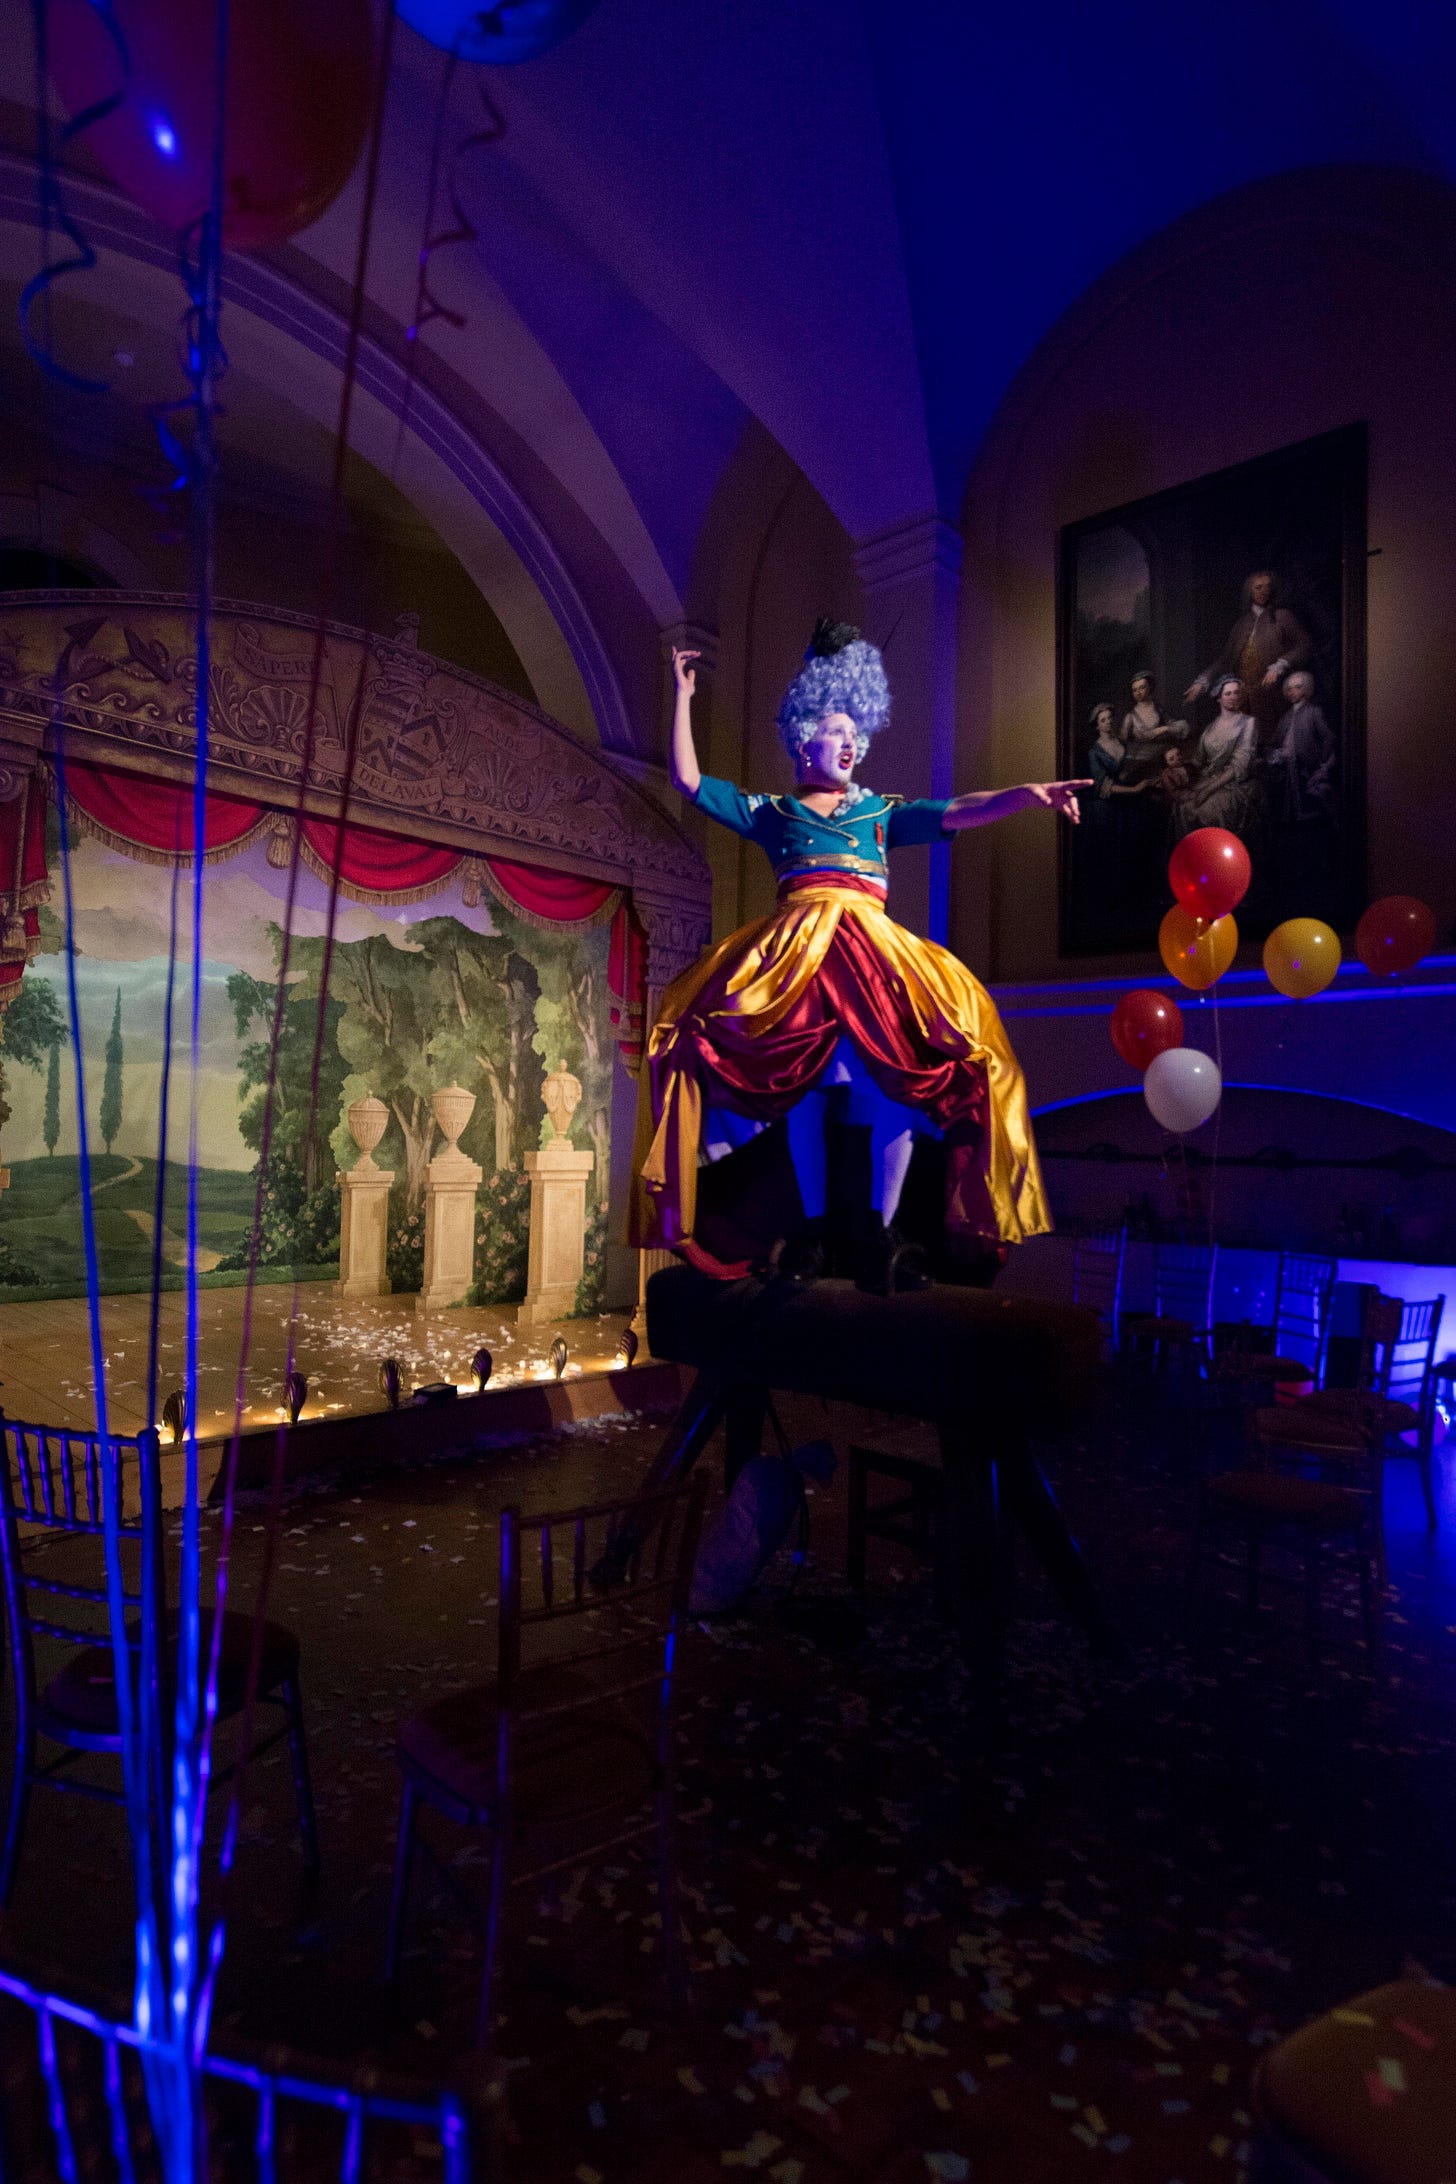 Georgian drag artist stands on top of a pummel horse with a theatre back drop and balloons